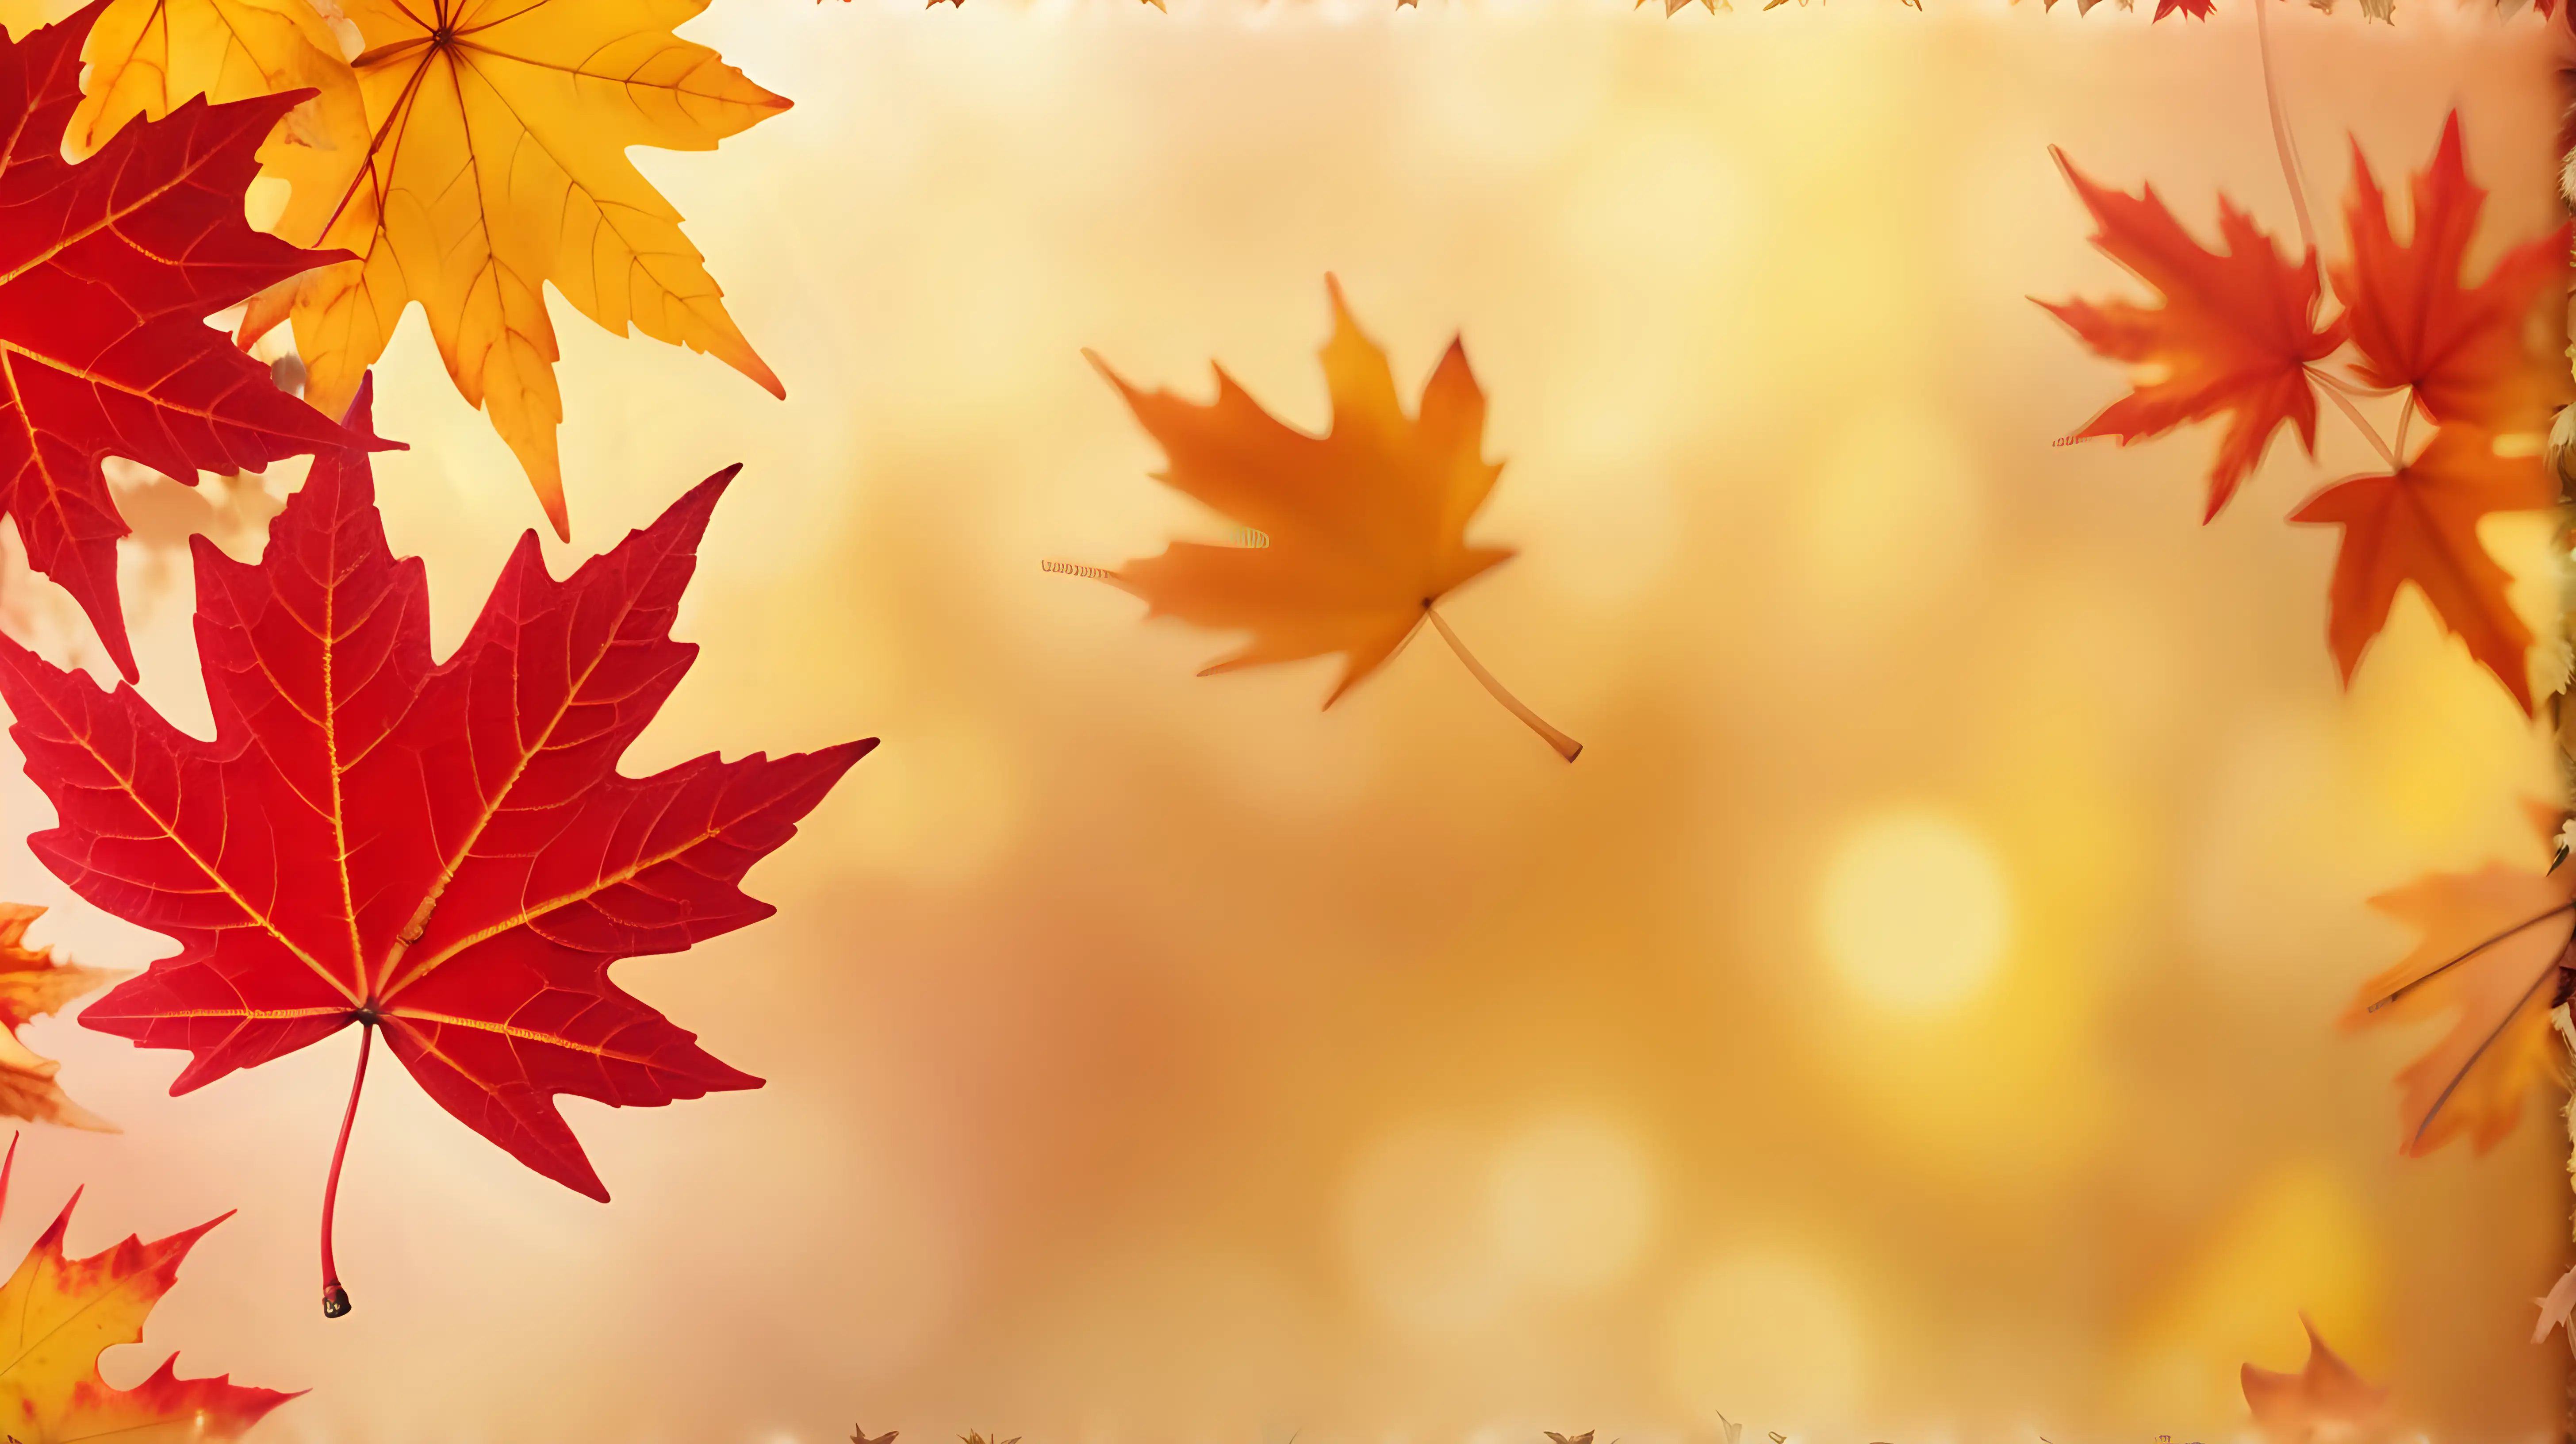 Vibrant Autumn Farewell Embrace the End of Fall with Red and Yellow Maple Leaves